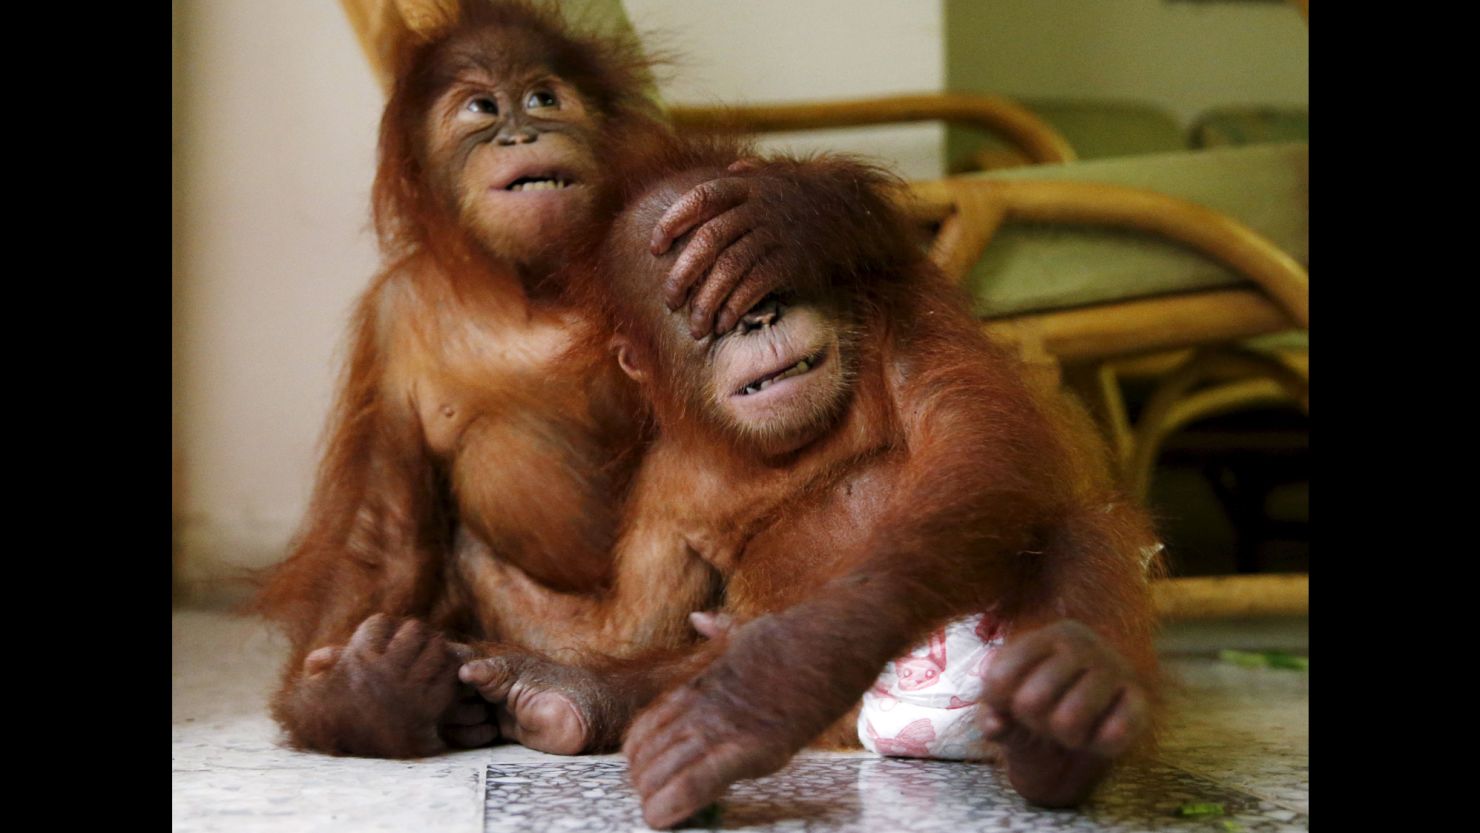 Two baby orangutans play with each other at the wildlife department in Kuala Lumpur, Malaysia, on Monday, October 19. The animals were seized in July after traffickers were attempting to sell them.